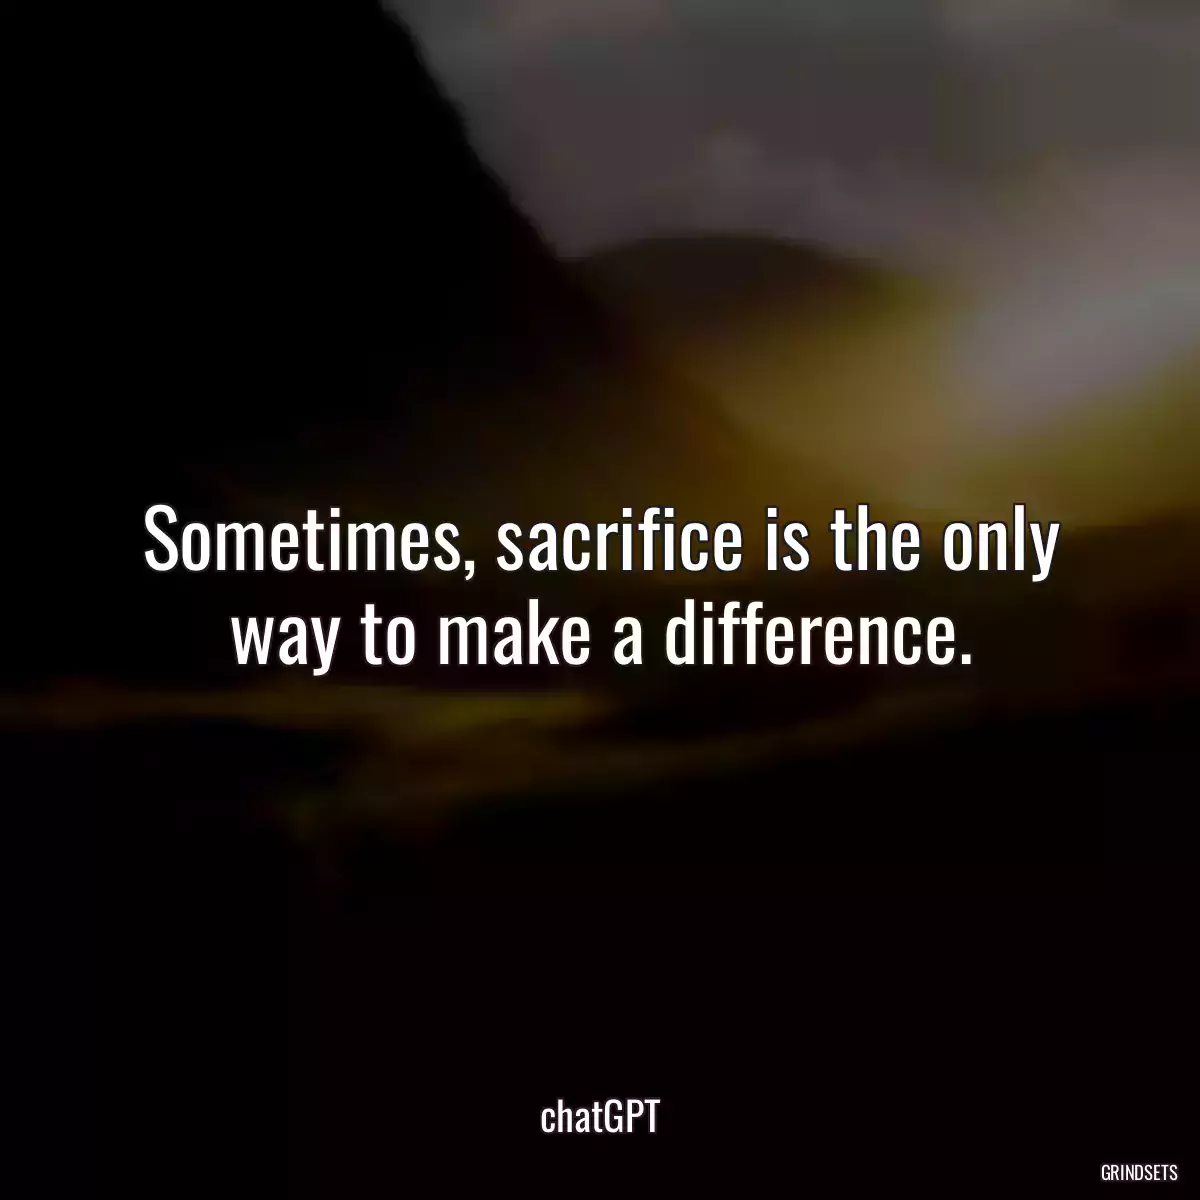 Sometimes, sacrifice is the only way to make a difference.